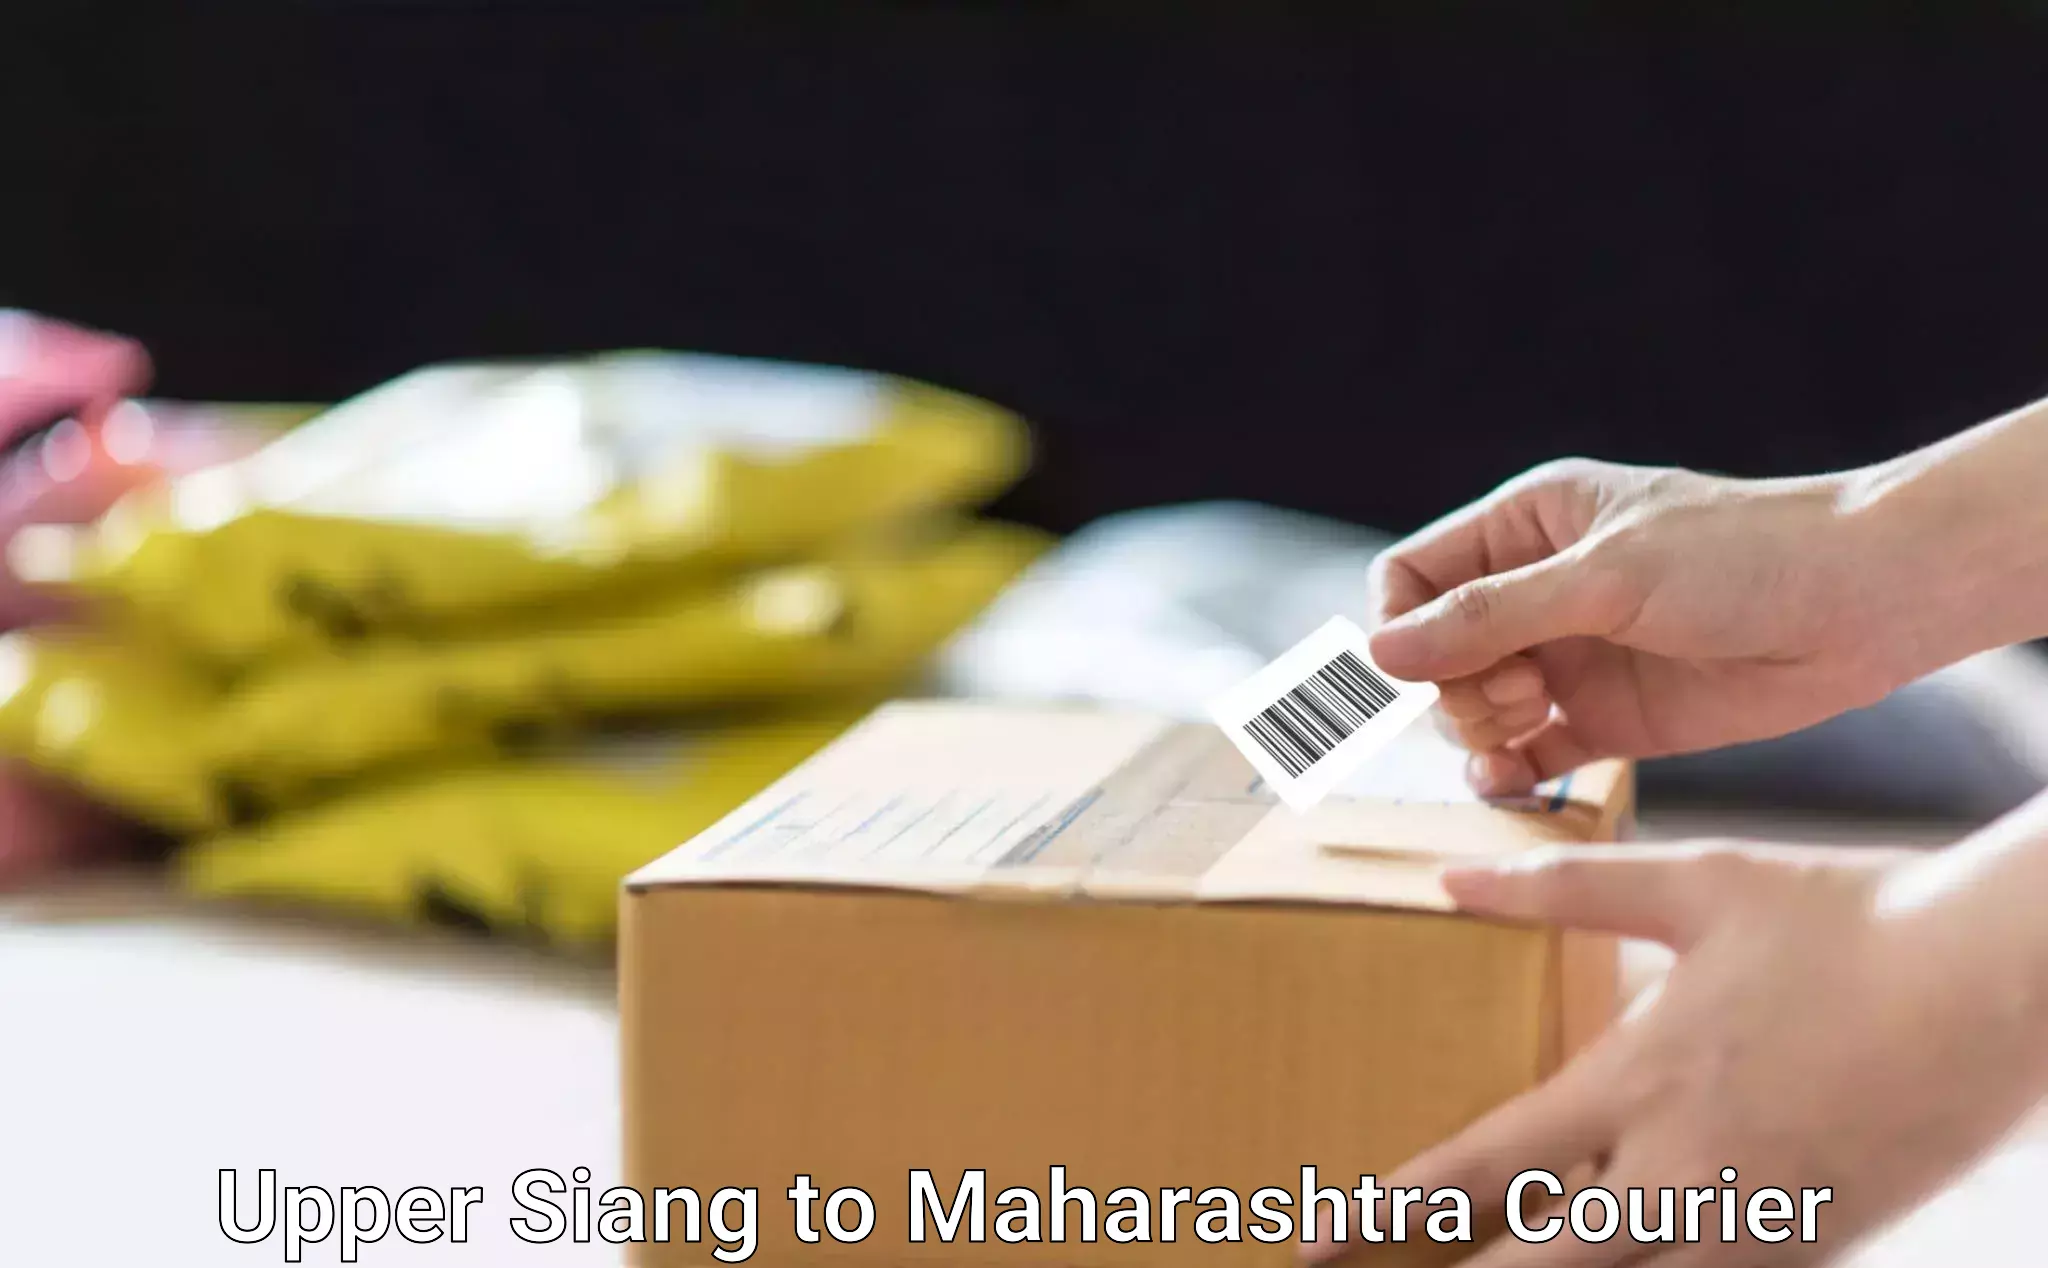 Courier service partnerships Upper Siang to Andheri